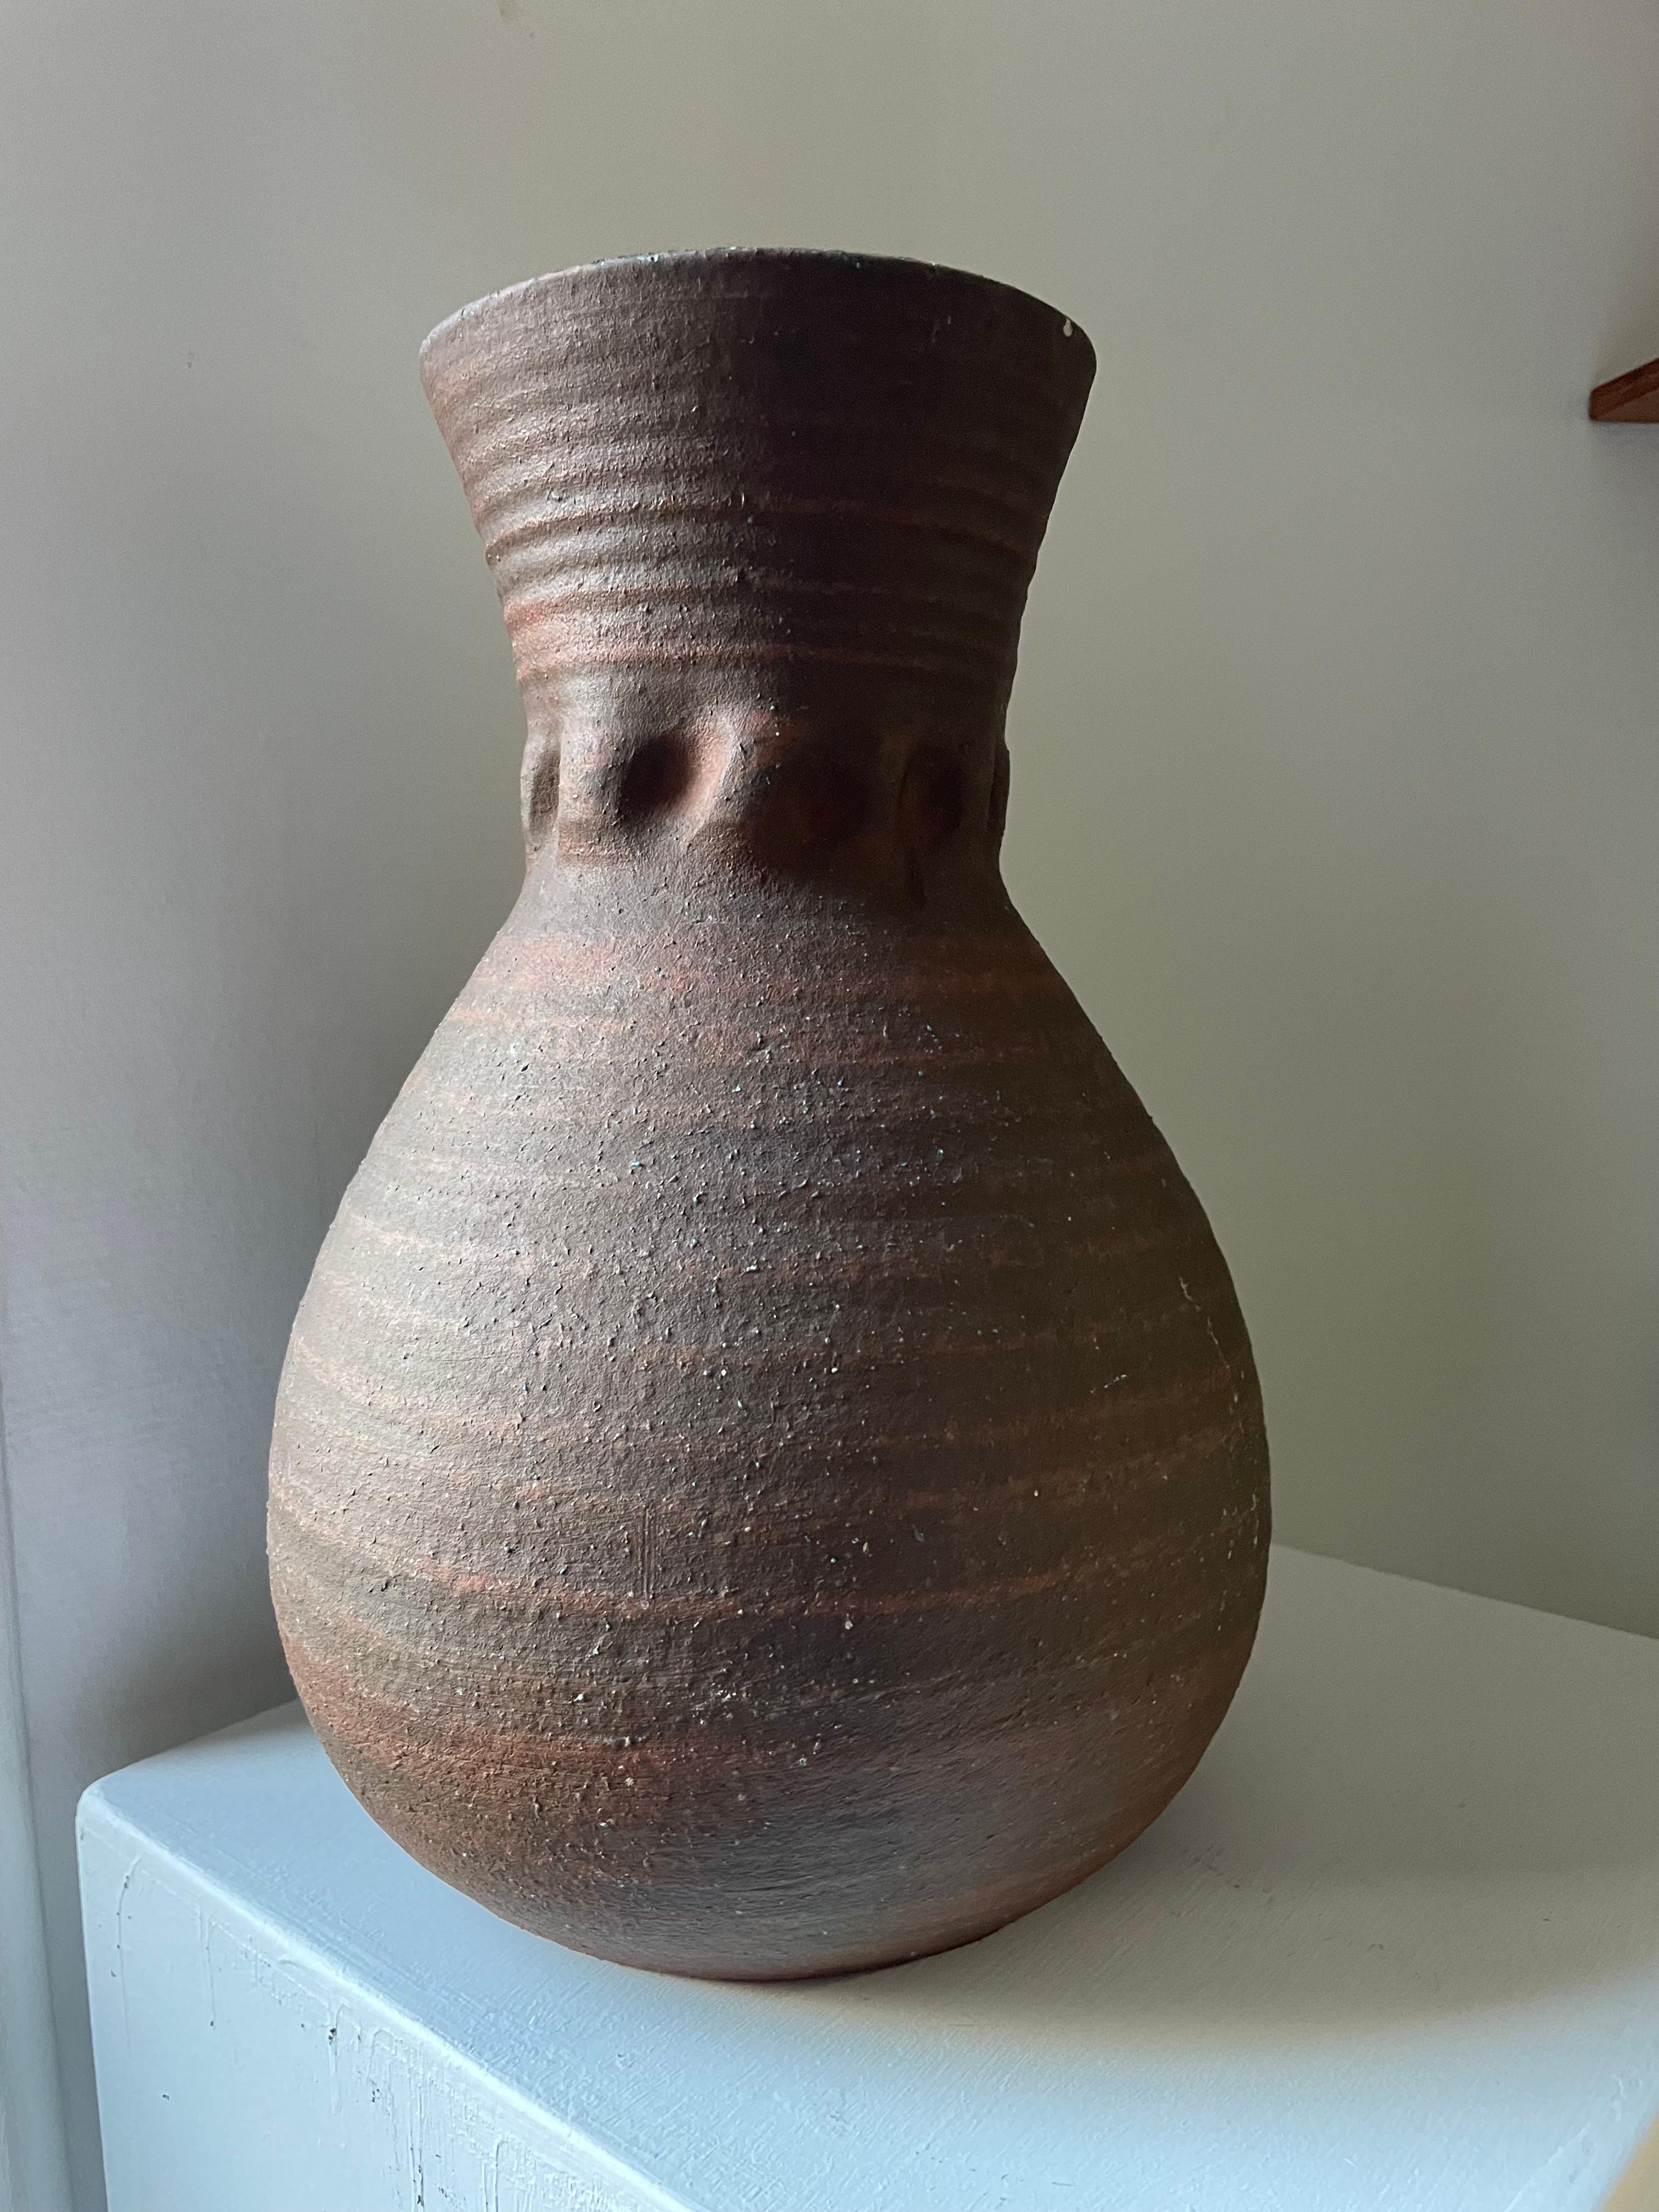 Large ceramic vase by Accolay potters, Gauloise brown series, circa 1960 vintage.
Excellent condition, nothing to report
Heavy weight

Dimensions:
H29.5cm